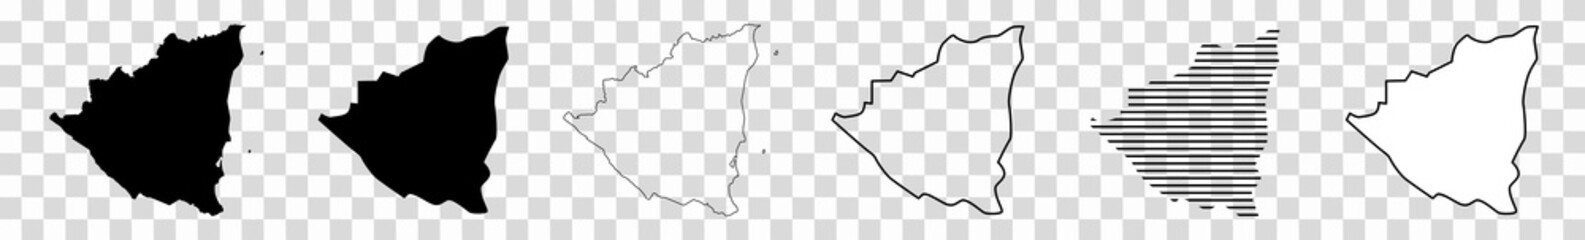 Nicaragua Map Black | Nicaraguan Border | State Country | Transparent Isolated | Variations